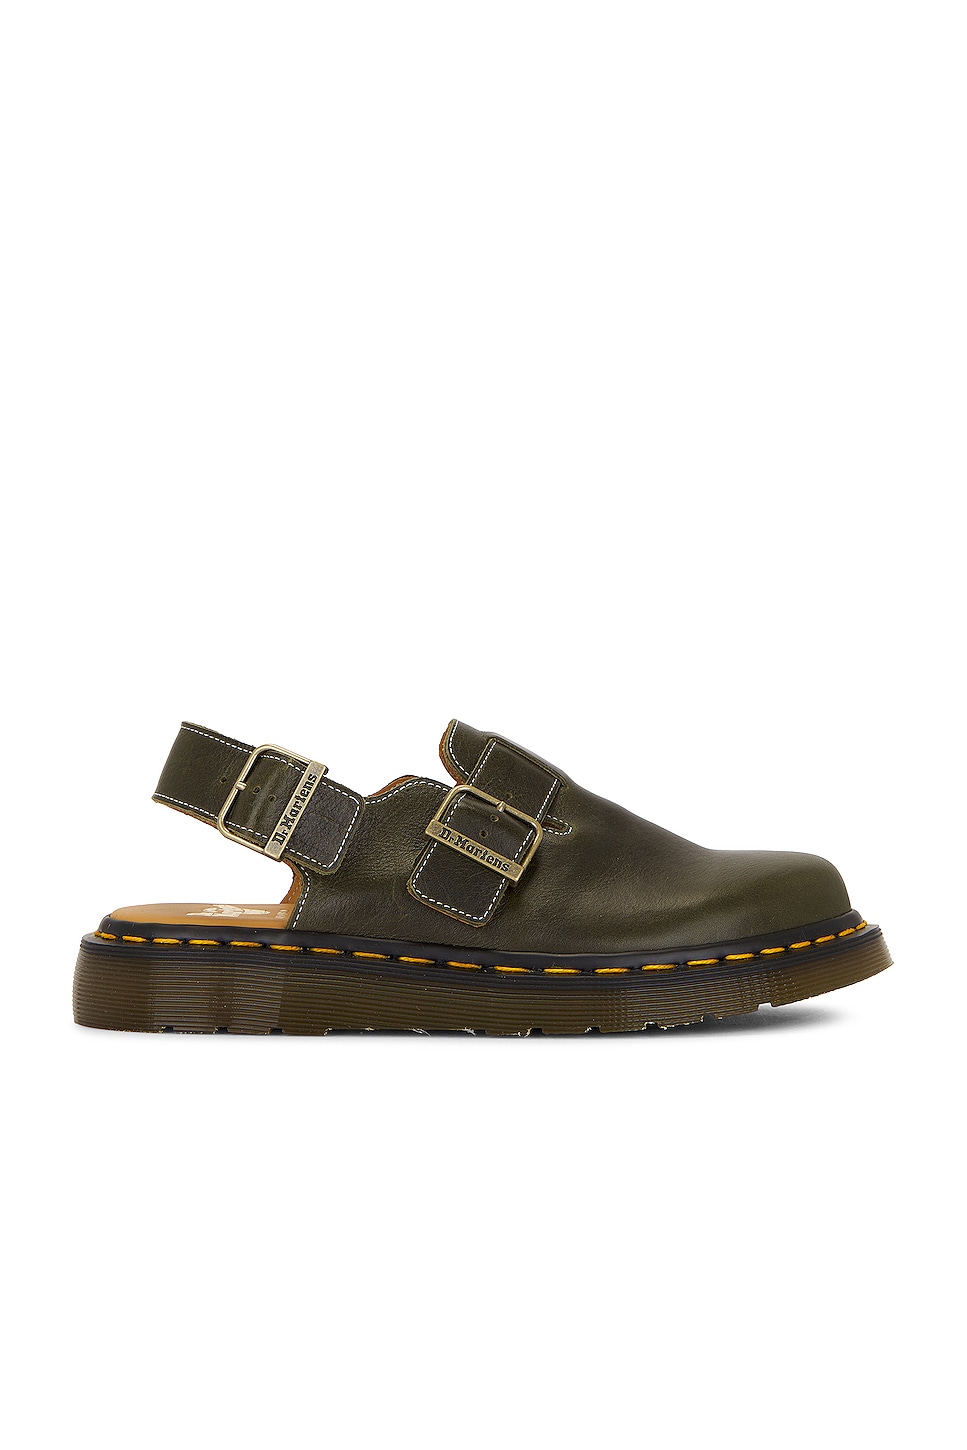 Image 1 of Dr. Martens Jorge Classic Calf in Dark Green